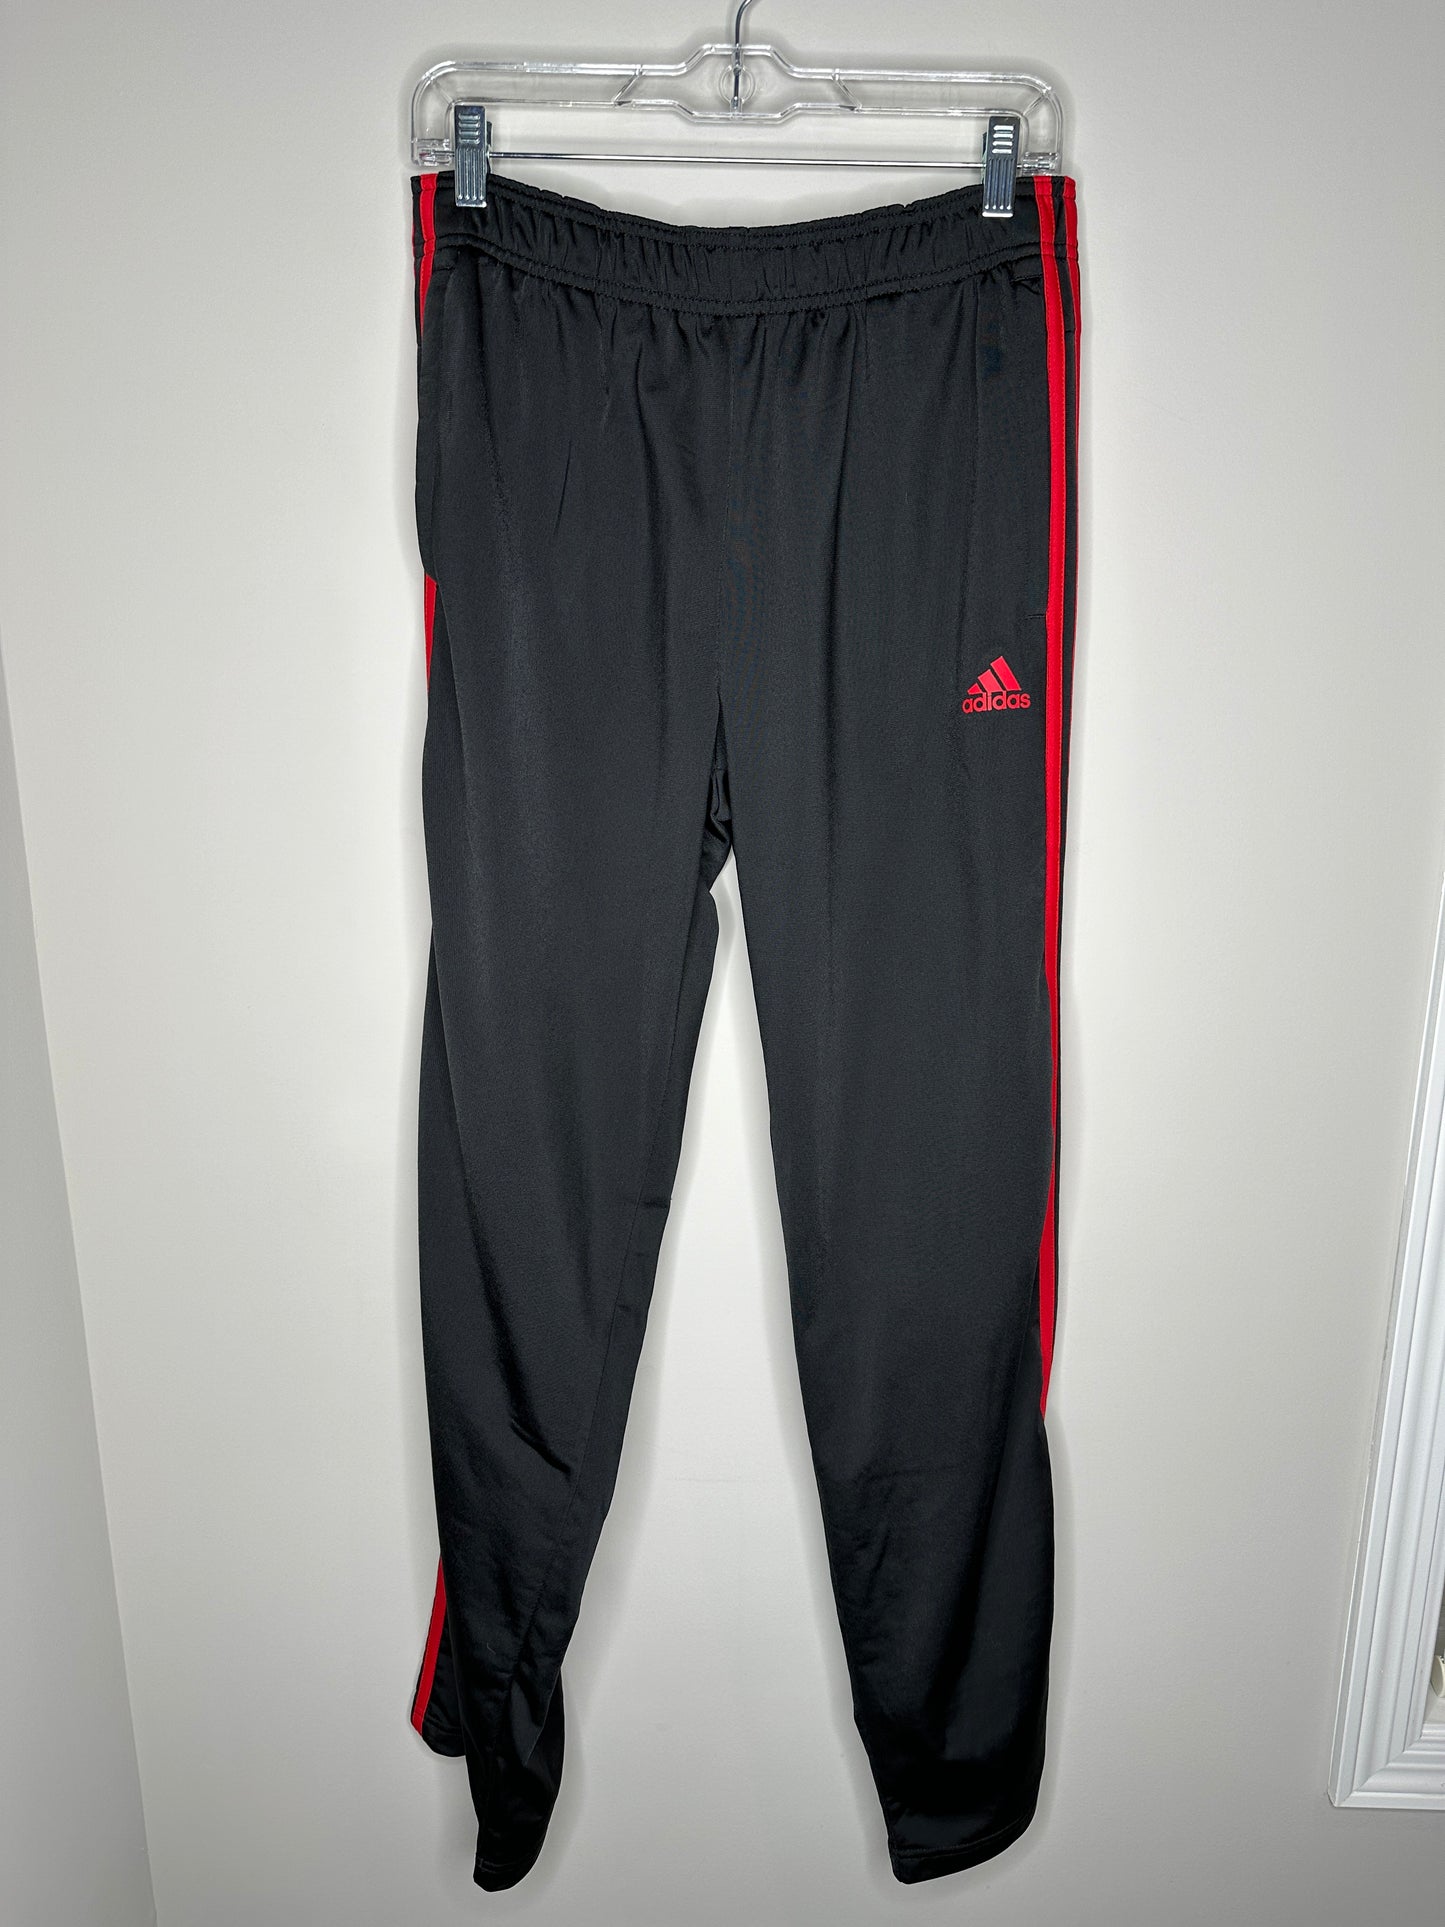 Adidas Men's Size M Black with Red Jogger Pants Joggers Athletic Pants